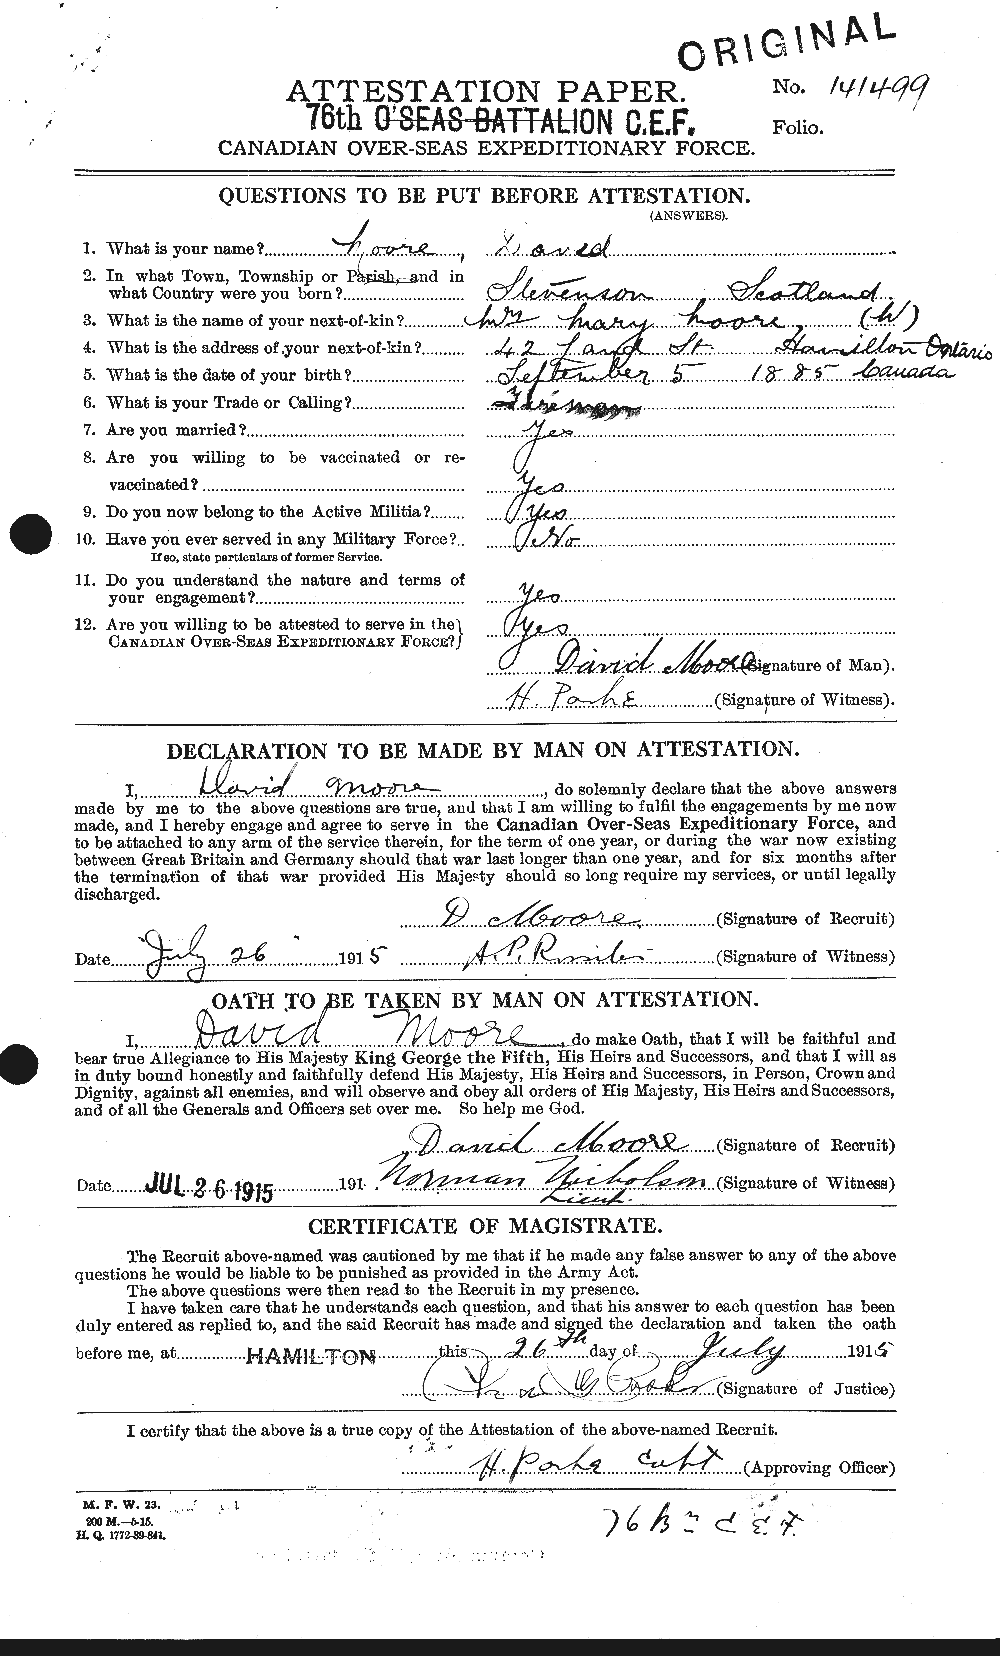 Personnel Records of the First World War - CEF 506564a